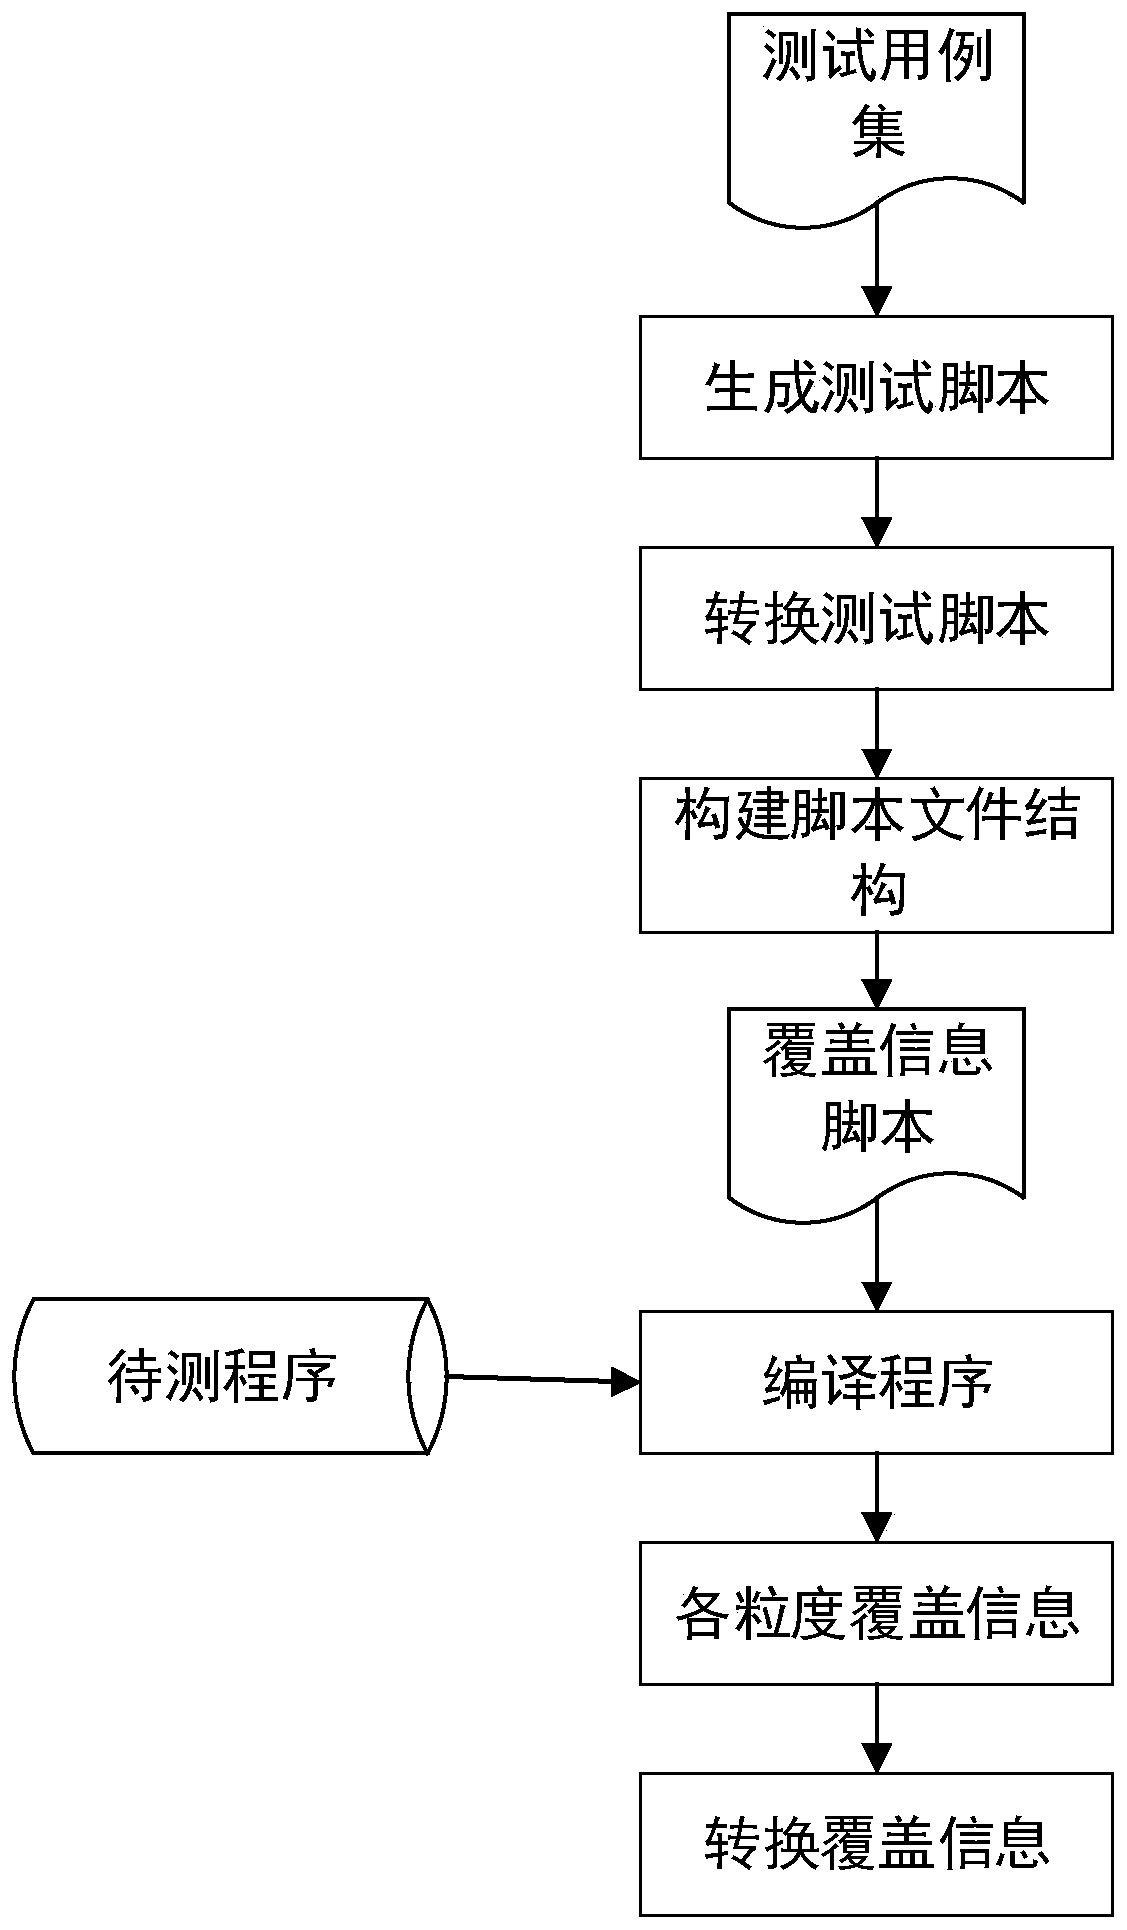 Code and combination coverage-based test case priority ranking method and test system